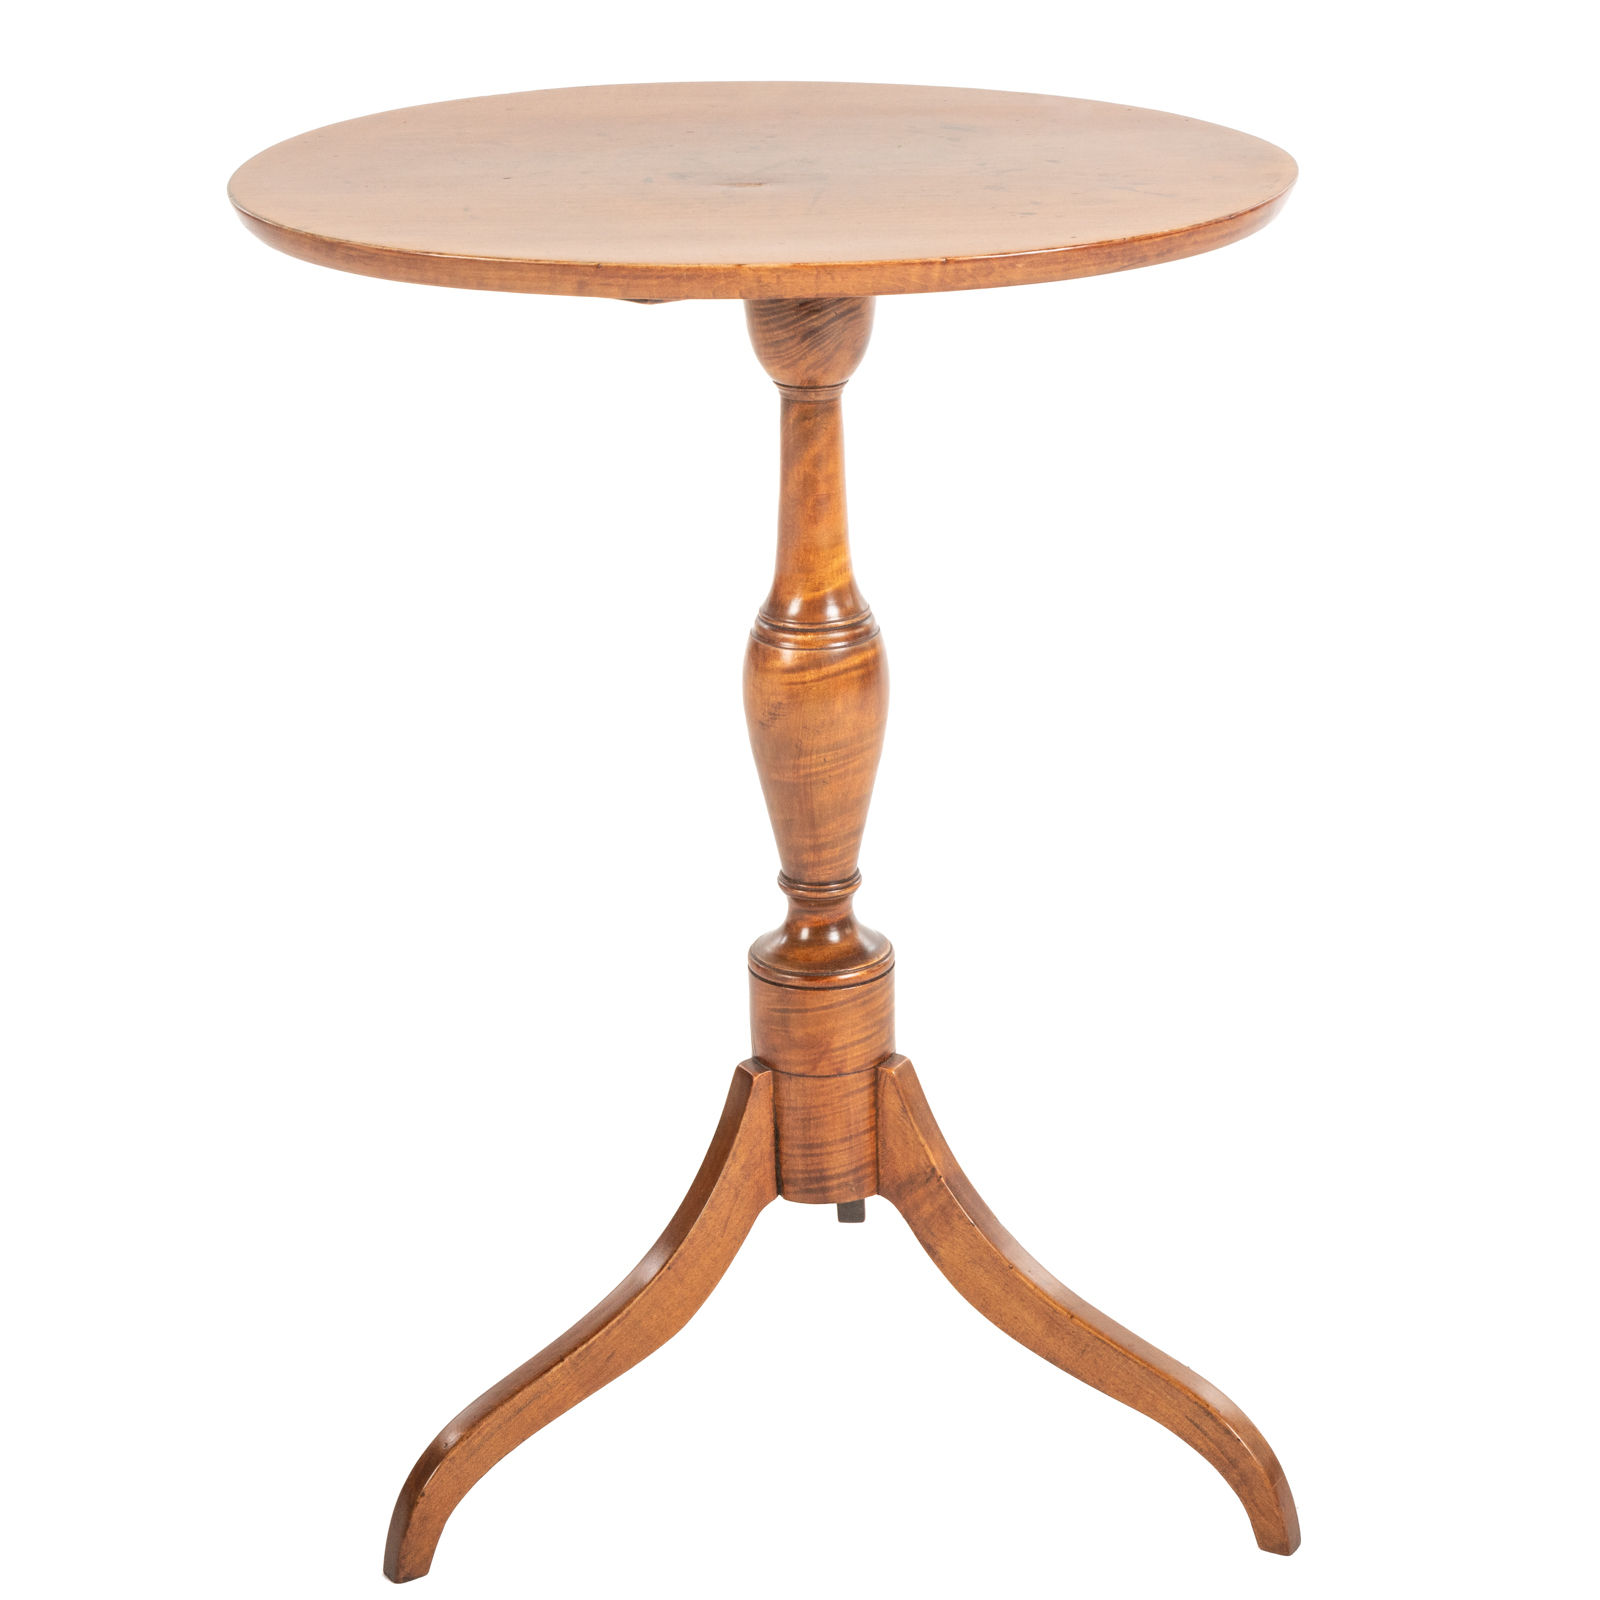 FEDERAL TIGER MAPLE CANDLESTAND 3695a1